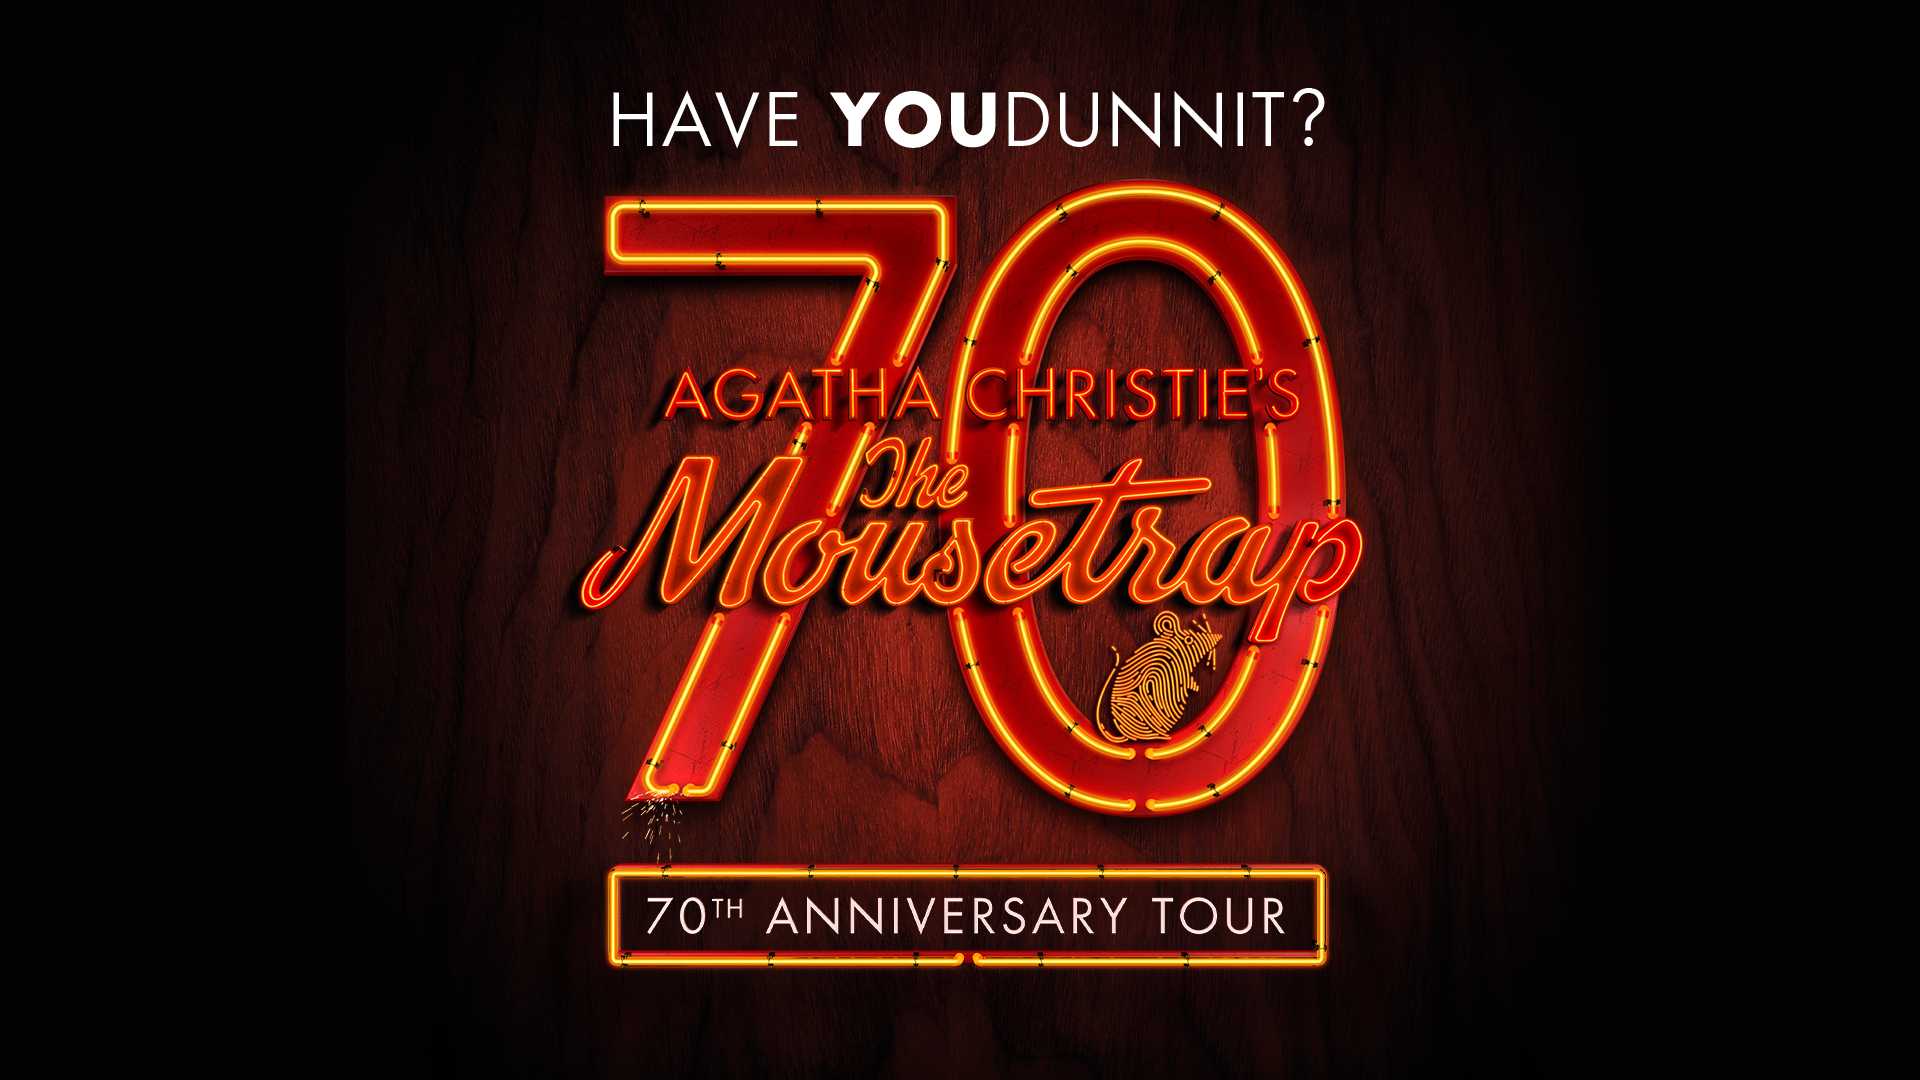 The Mousetrap Official Tour Site - The world's longest running play